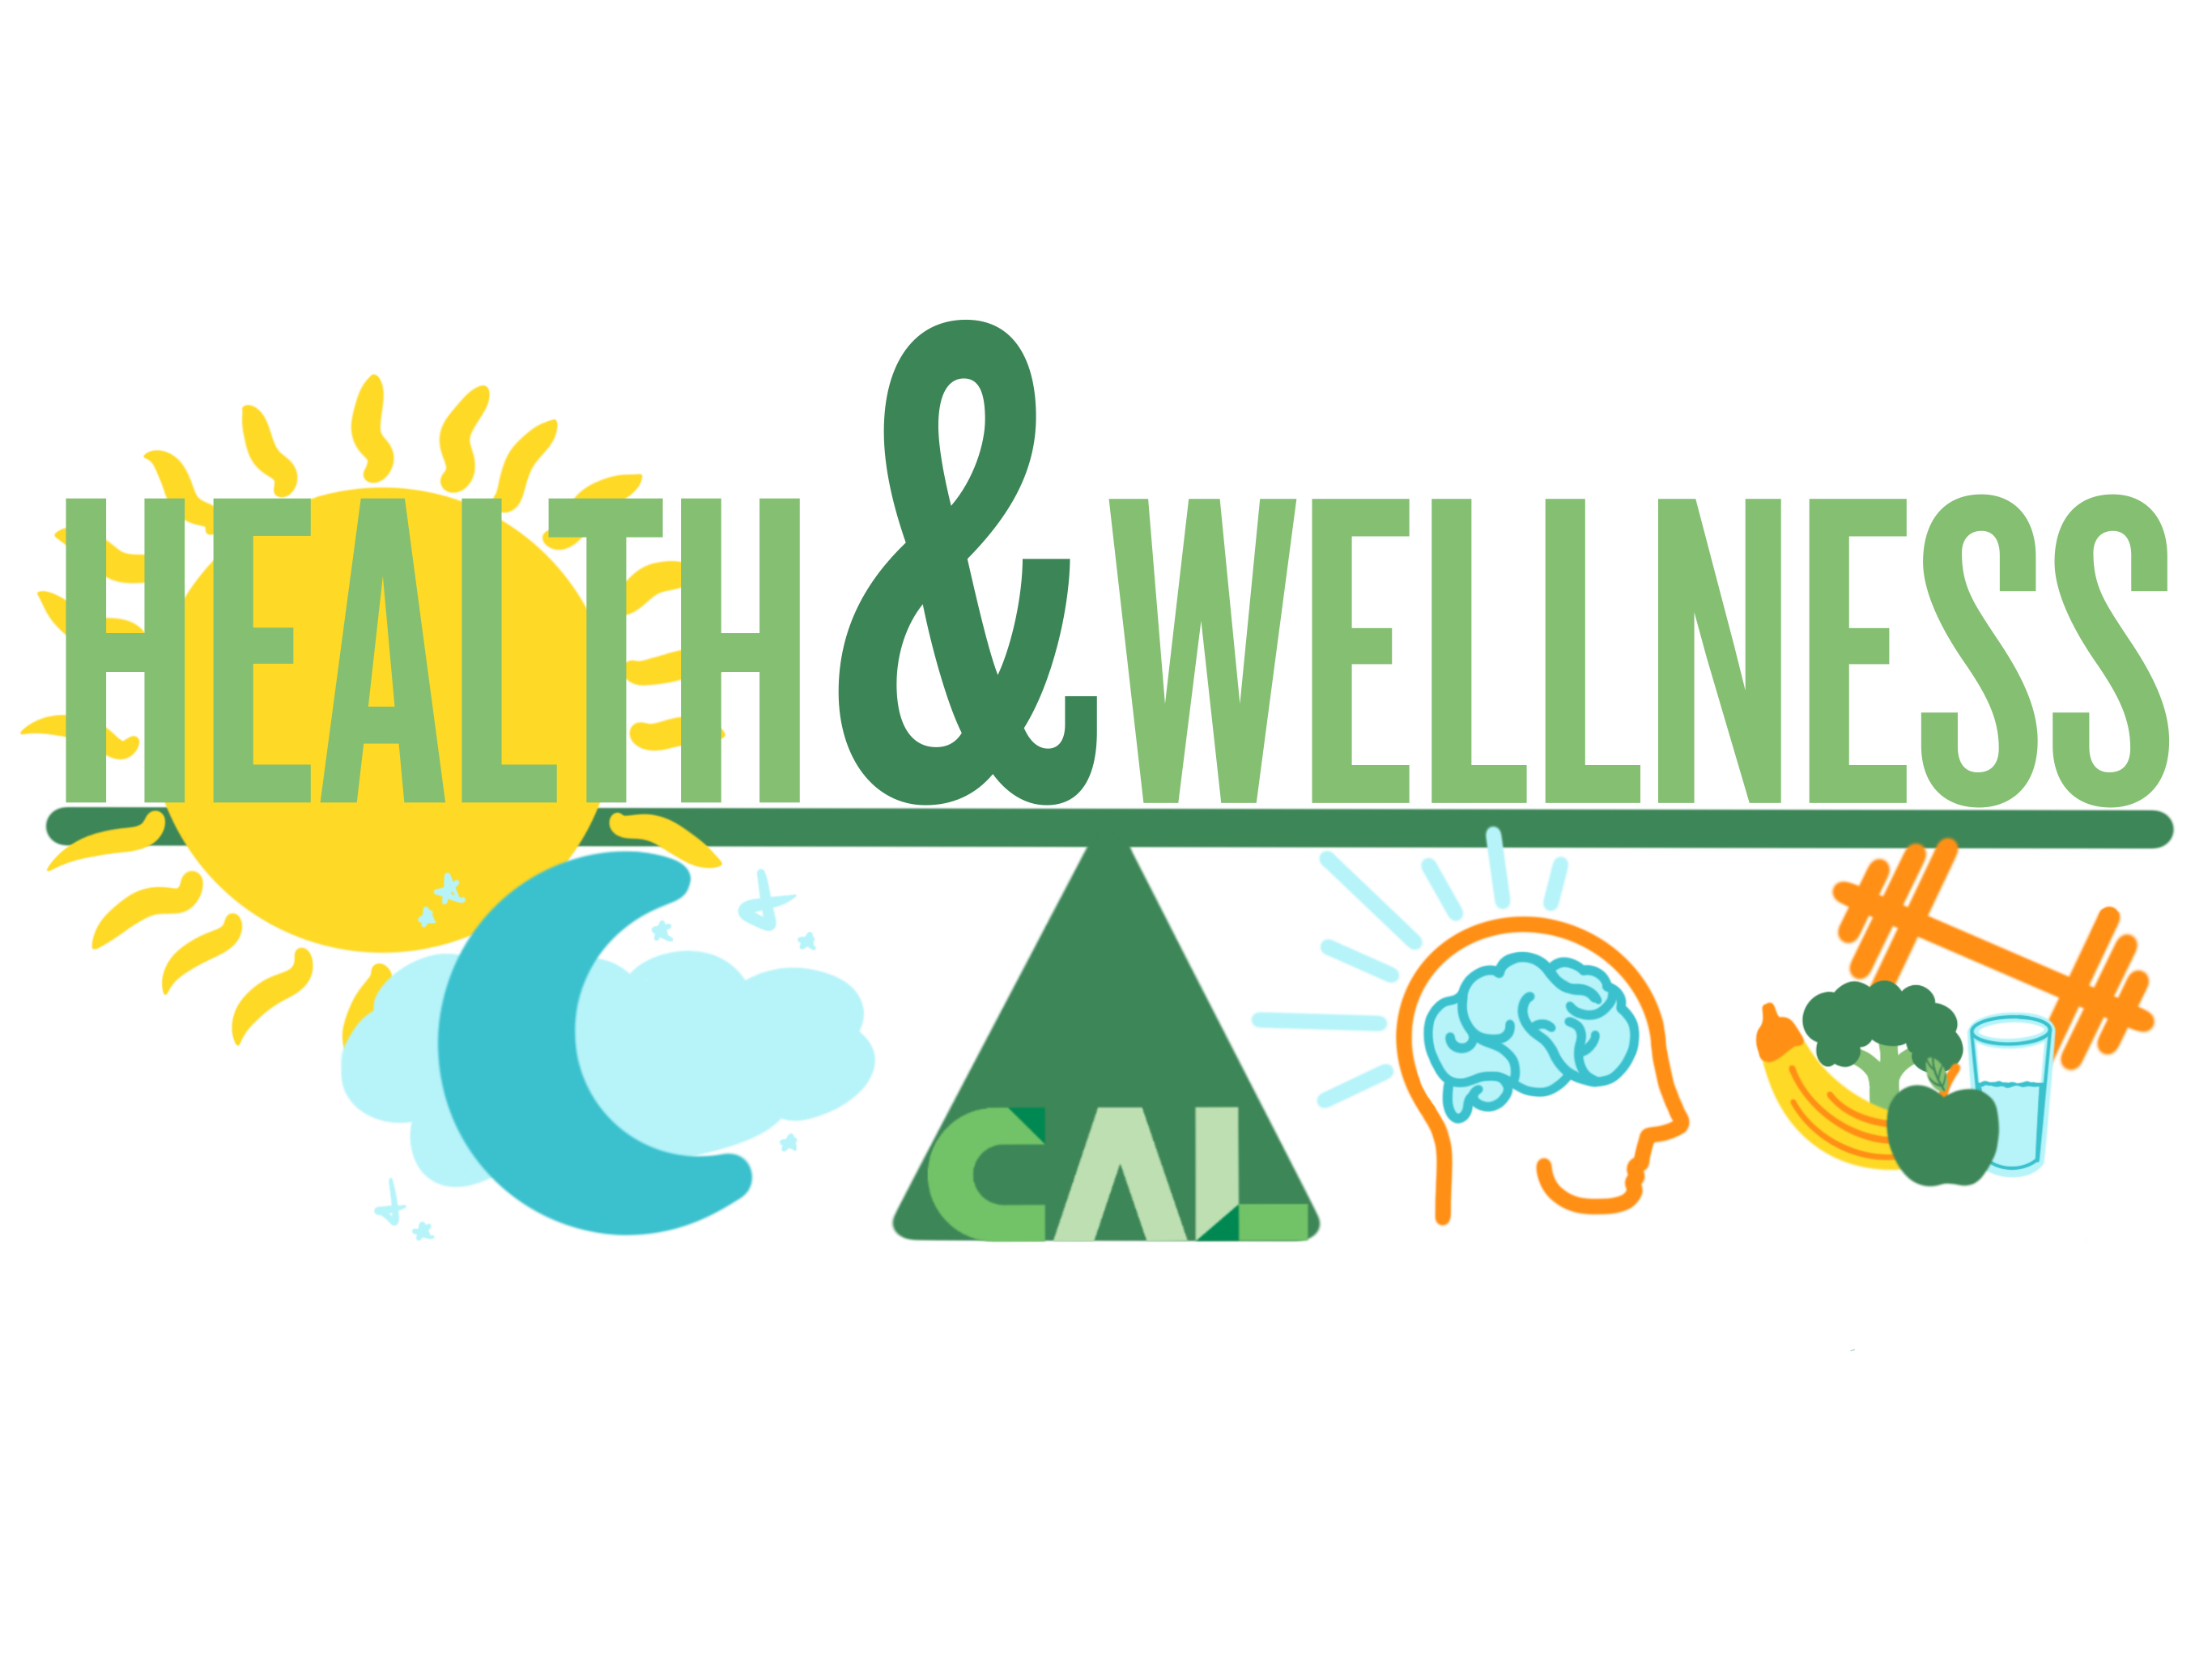 The words Health & Wellness diplayed with icons of sun, moon, weights & human mind